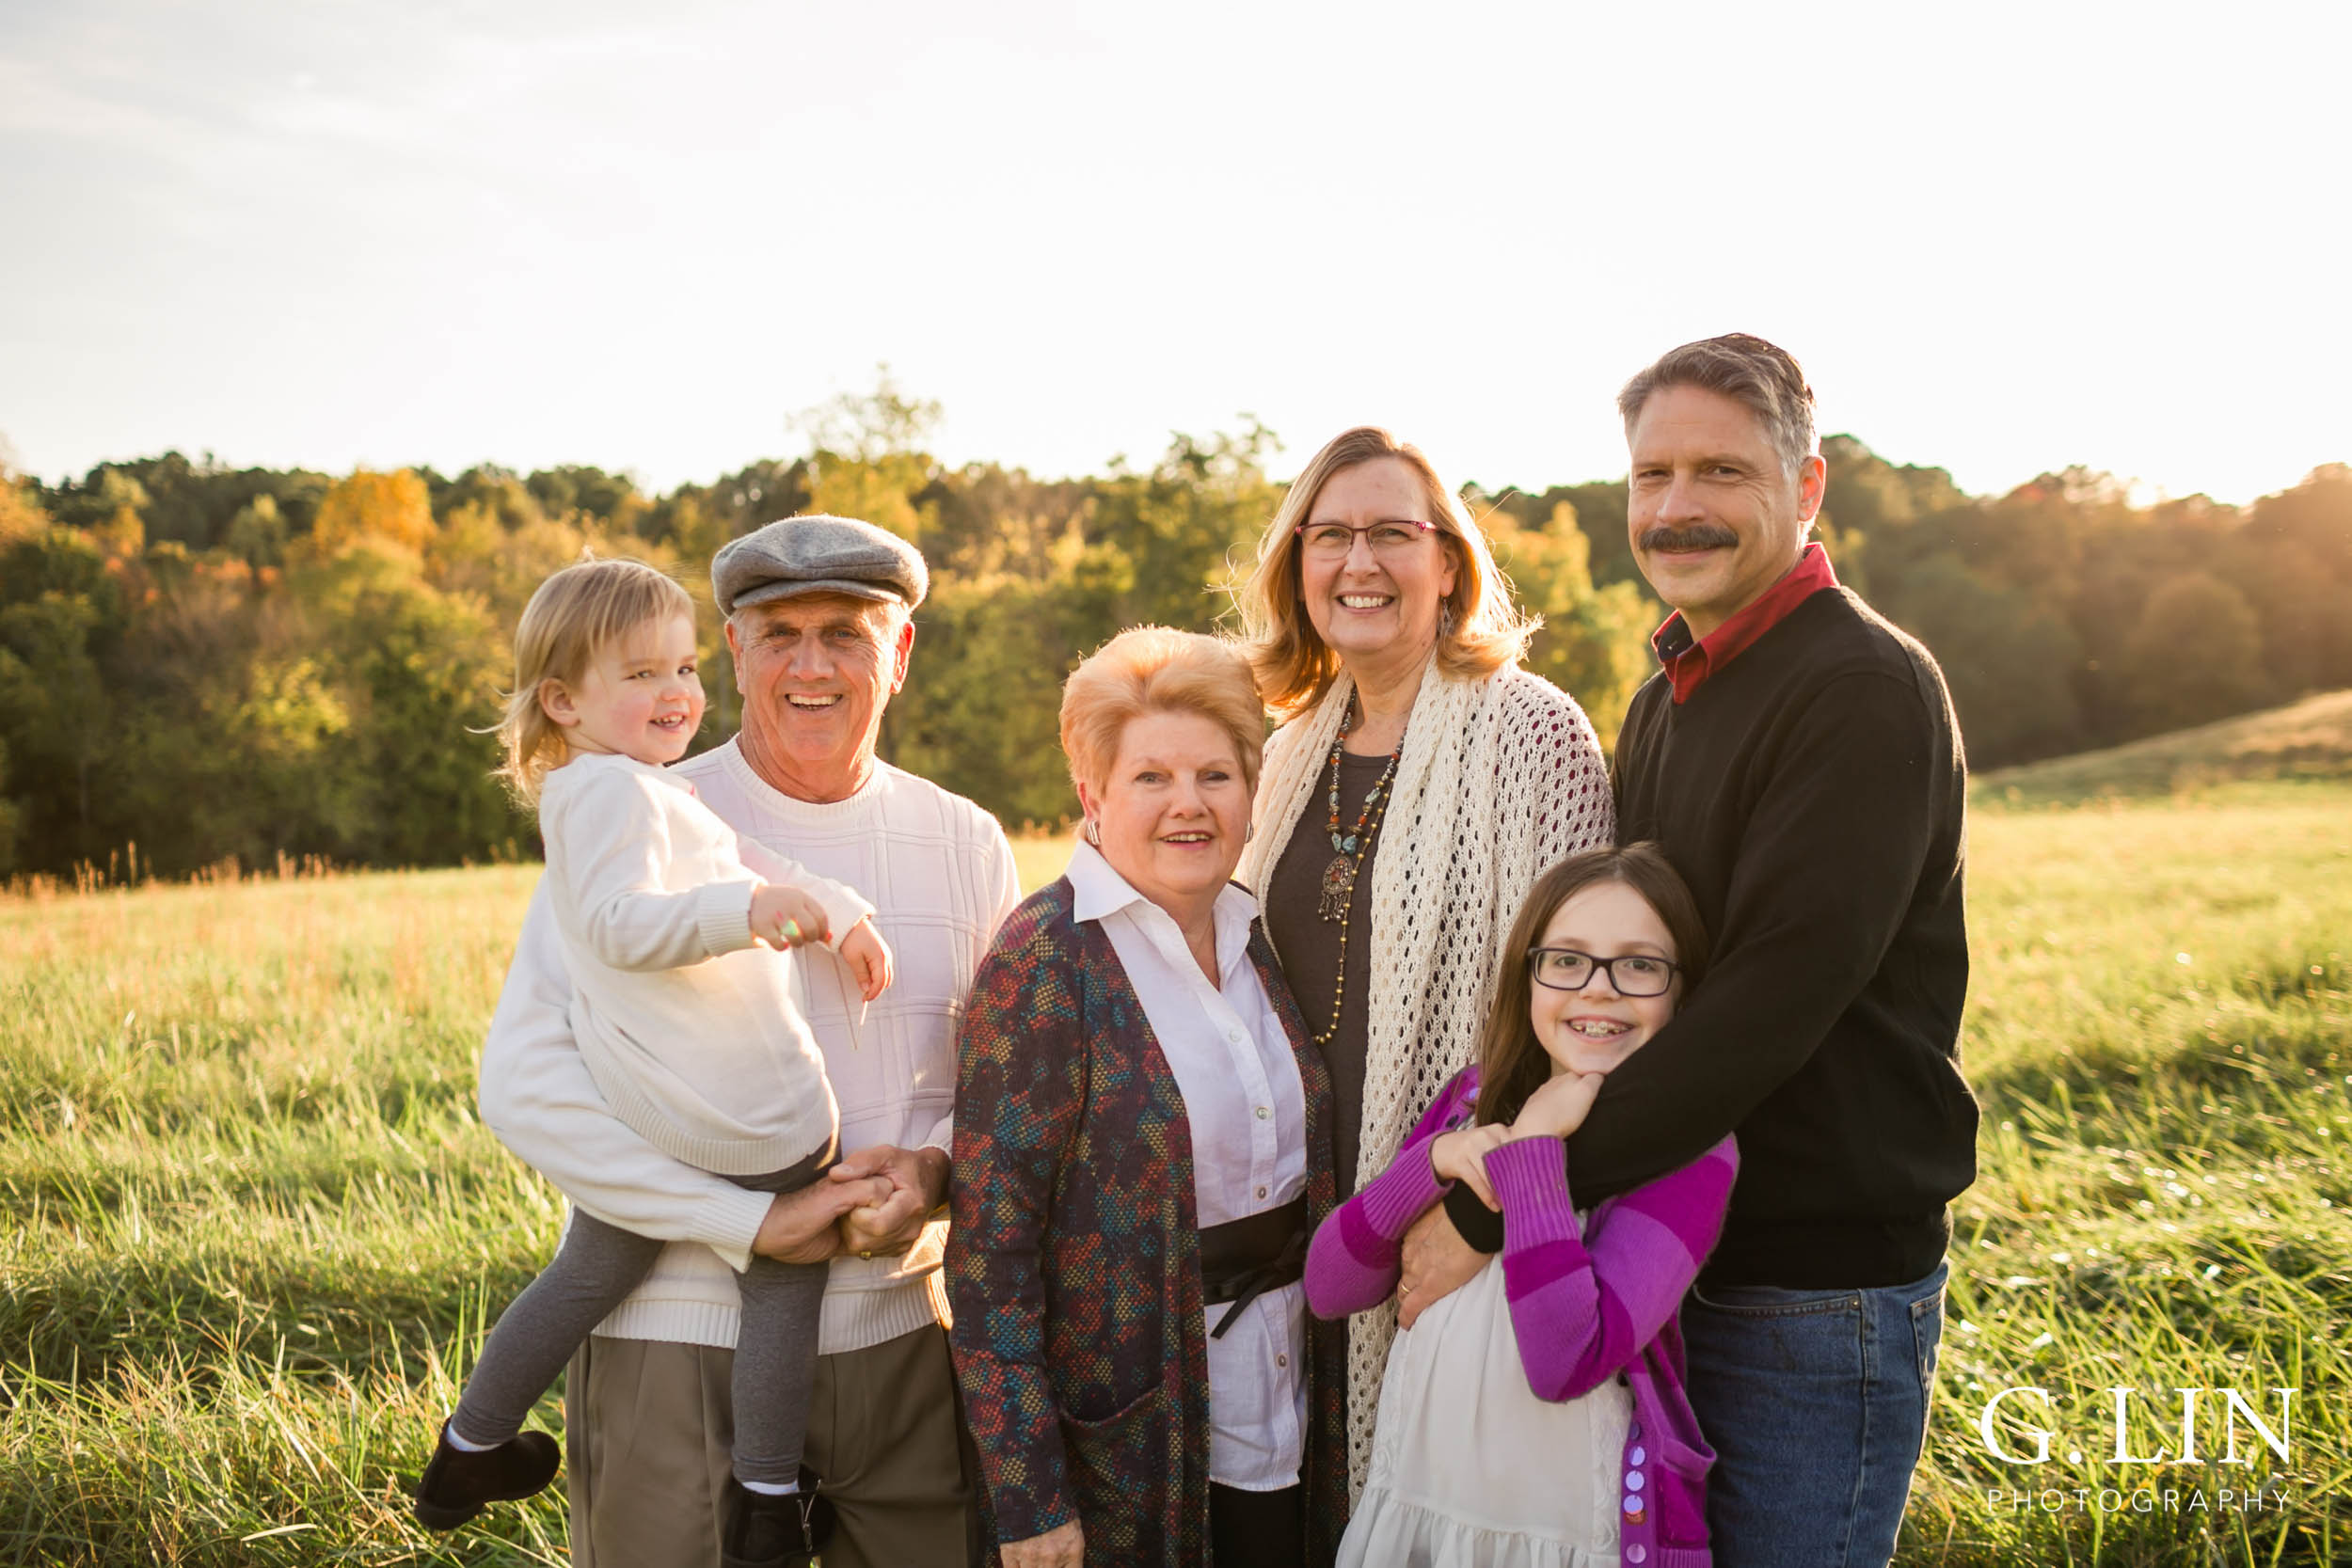 Candid group photo of grandparents and grandkids | Raleigh Family Photographer | G. Lin Photography 